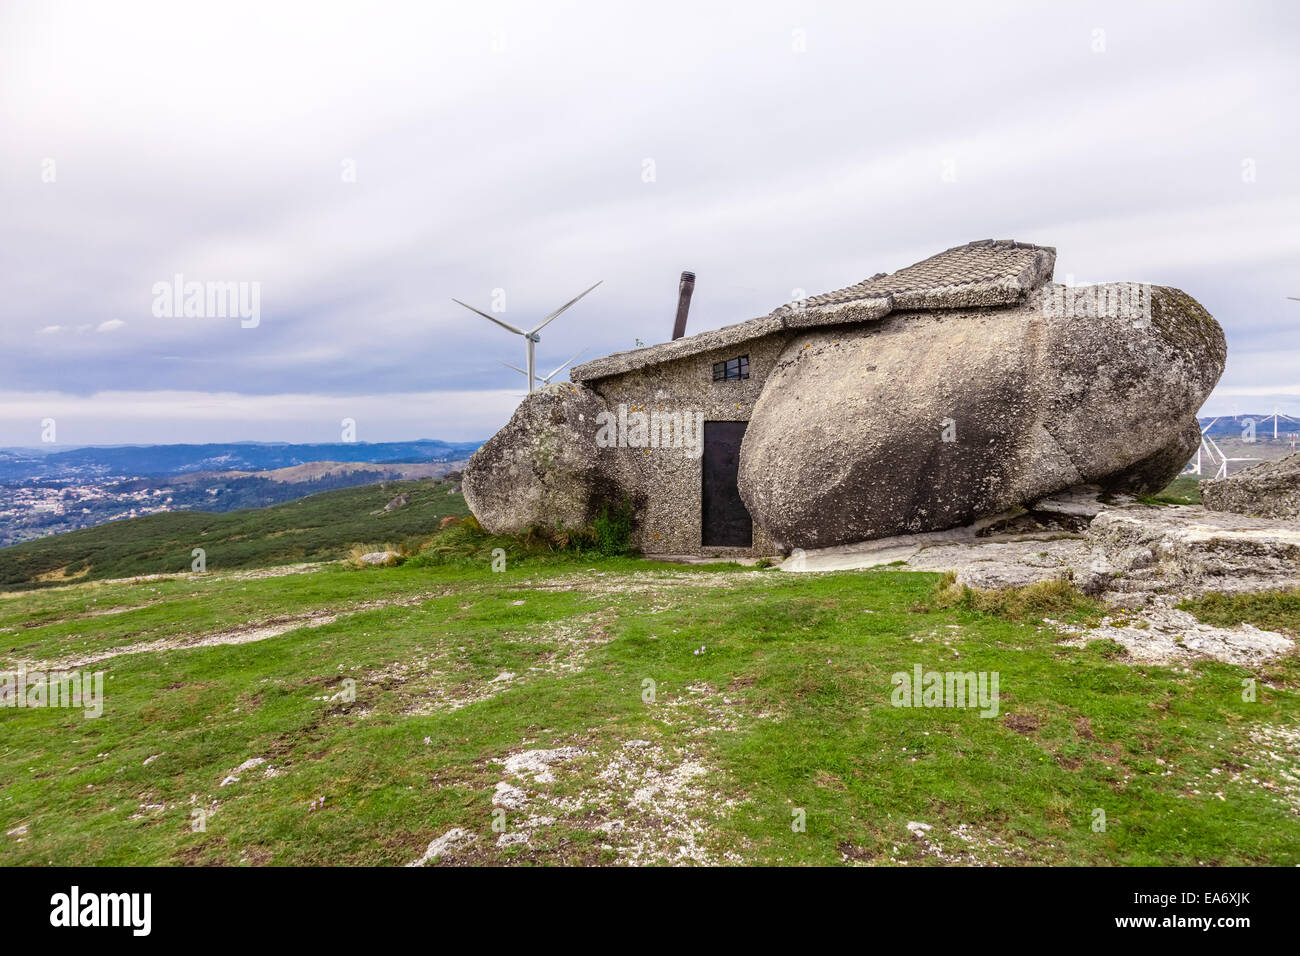 Casa do Penedo, a house built between huge rocks. Considered one of the strangest houses in the world. Fafe, Portugal. stone boulders strange unique Stock Photo